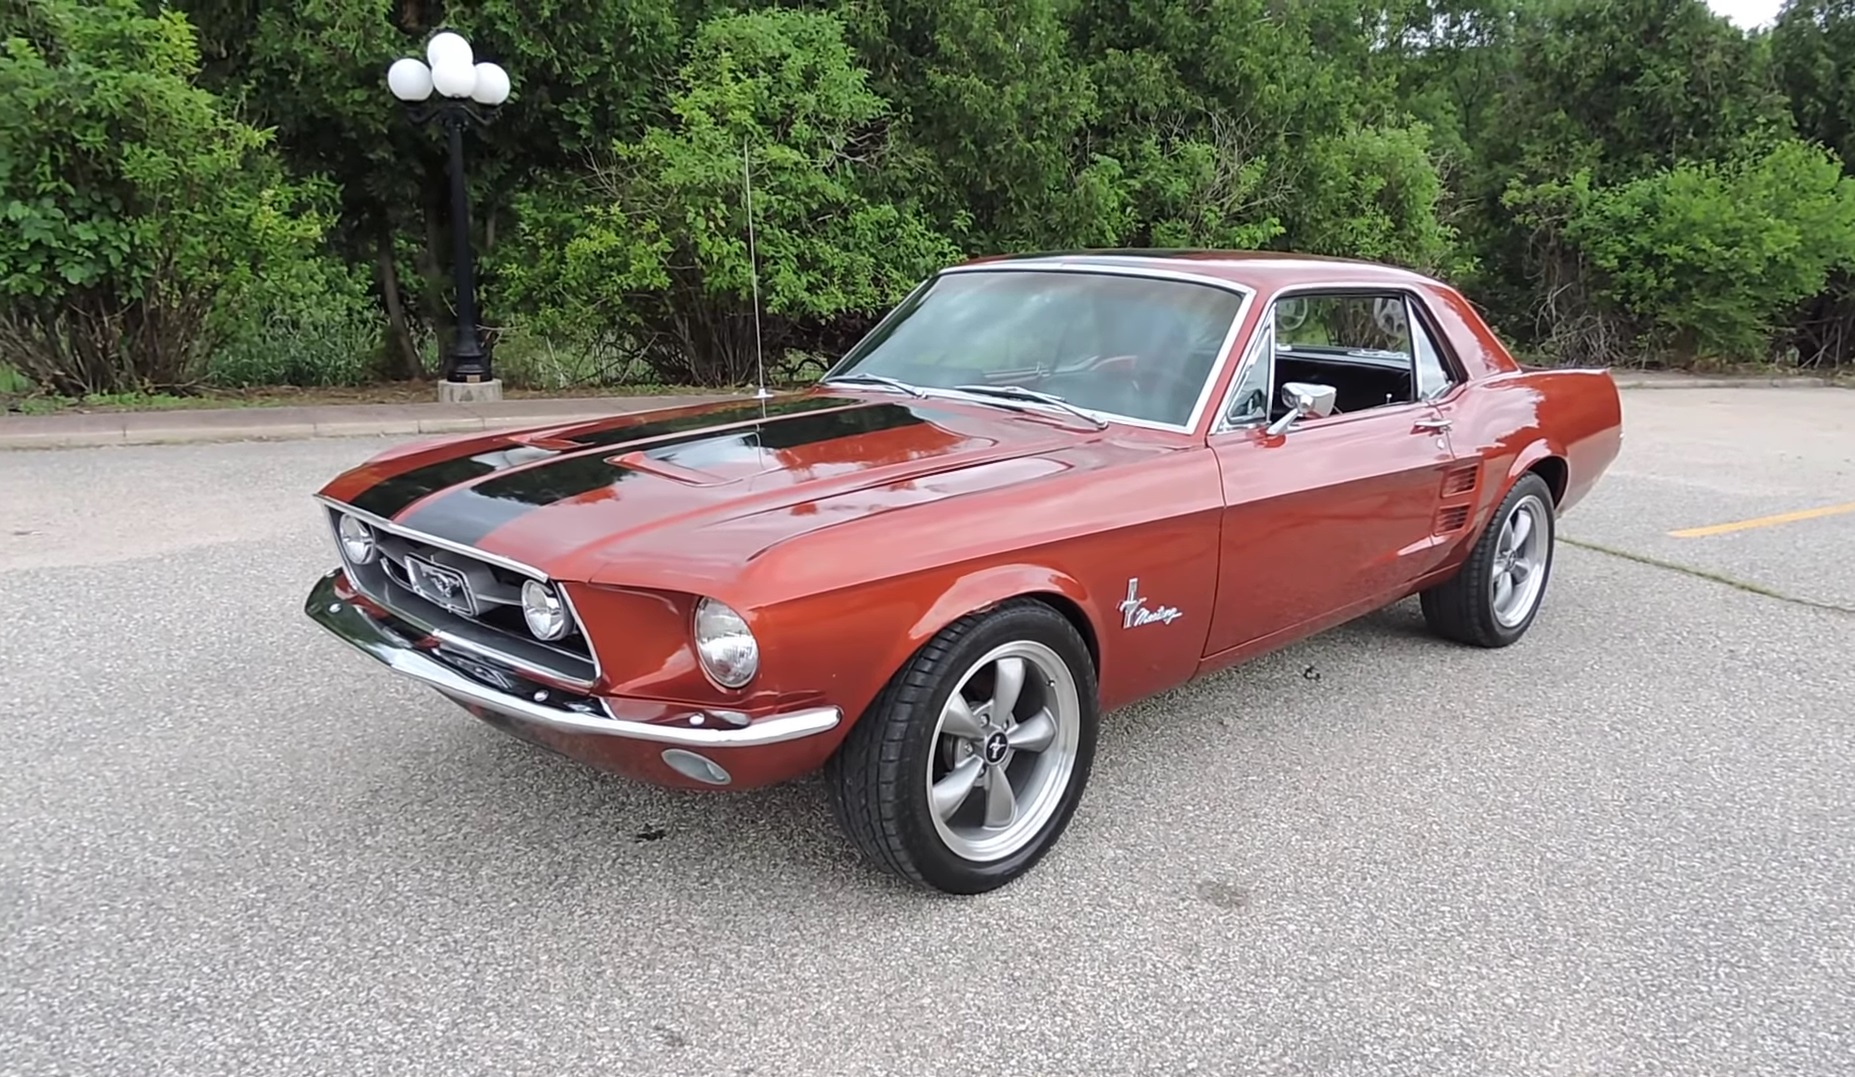 Restored 1968 Ford Mustang Quick Tour + Test Drive